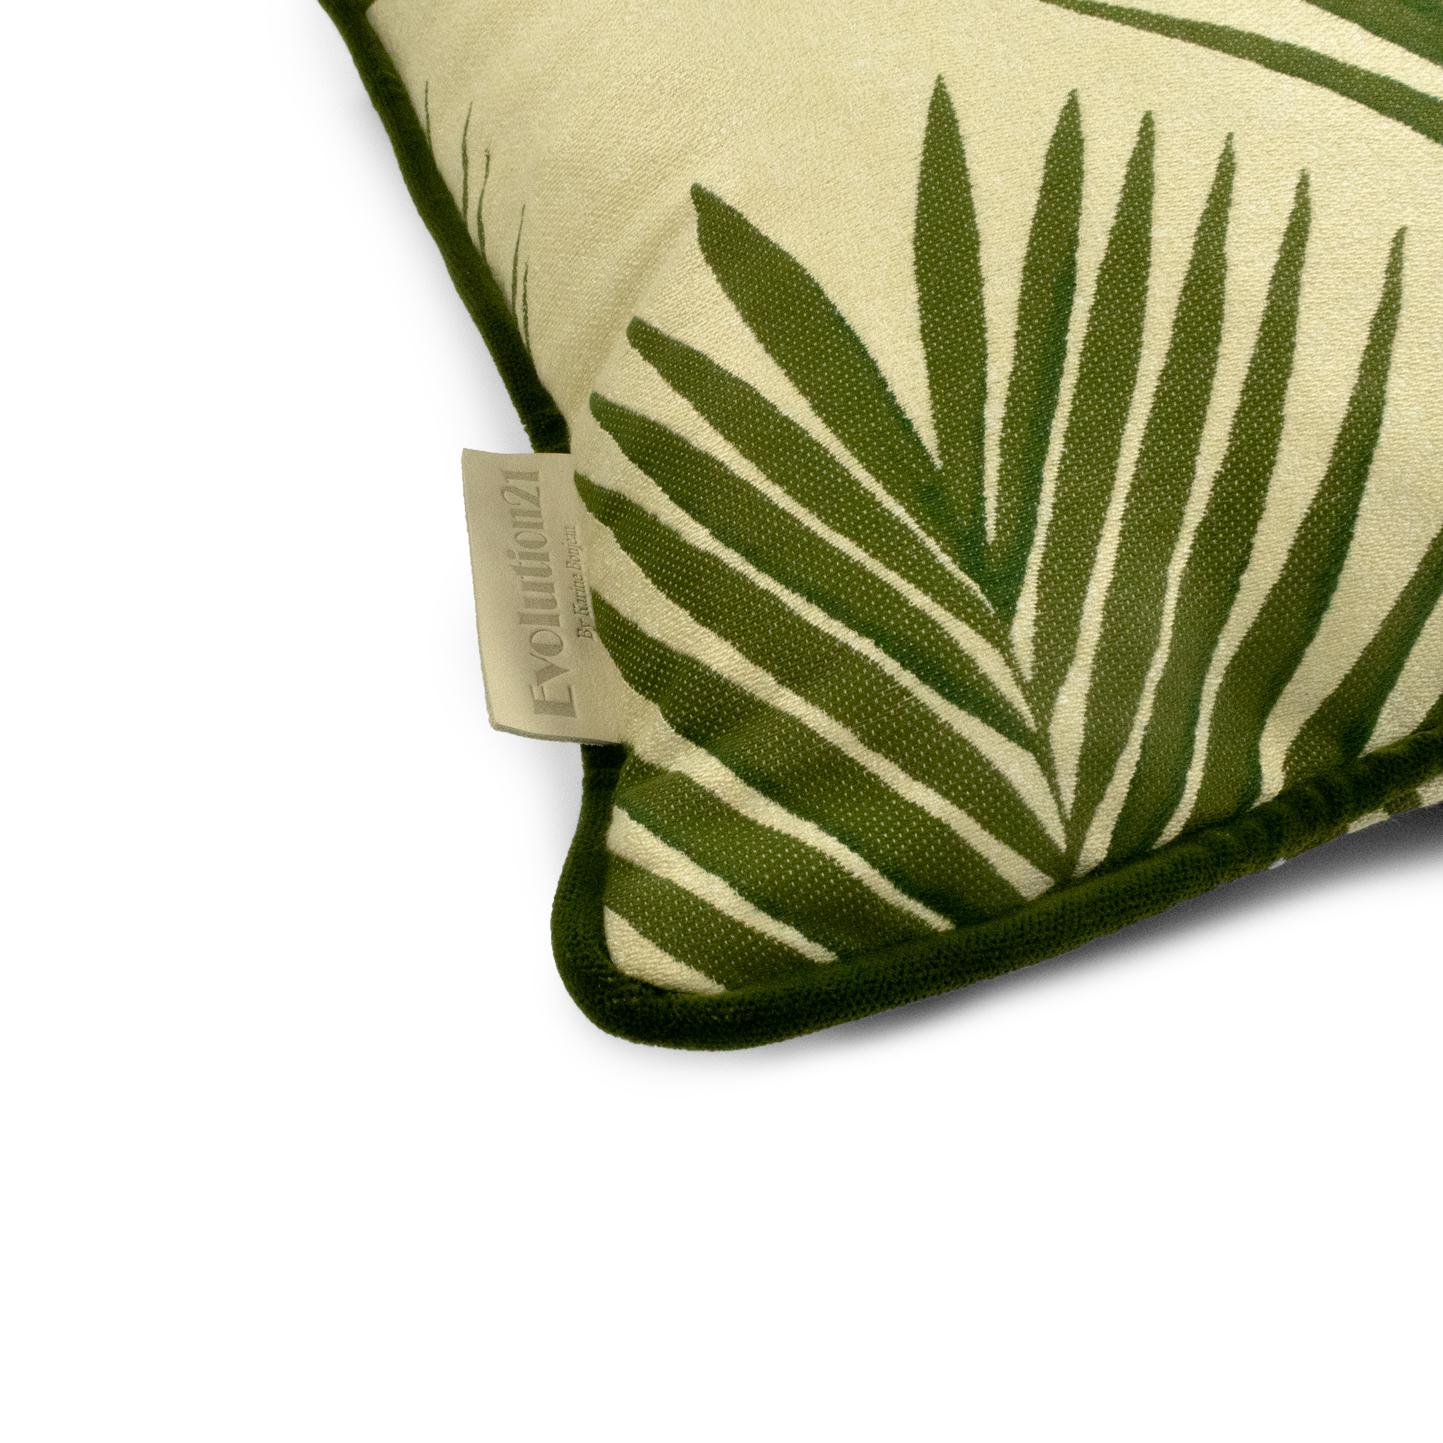 A tropical pattern in subtle tones, our bamboo leaf fabric upholstery is warm and playful. Harking to a different environment, the cushion helps to bring a natural look to both interior and exterior settings. 

Pick out similar colours in